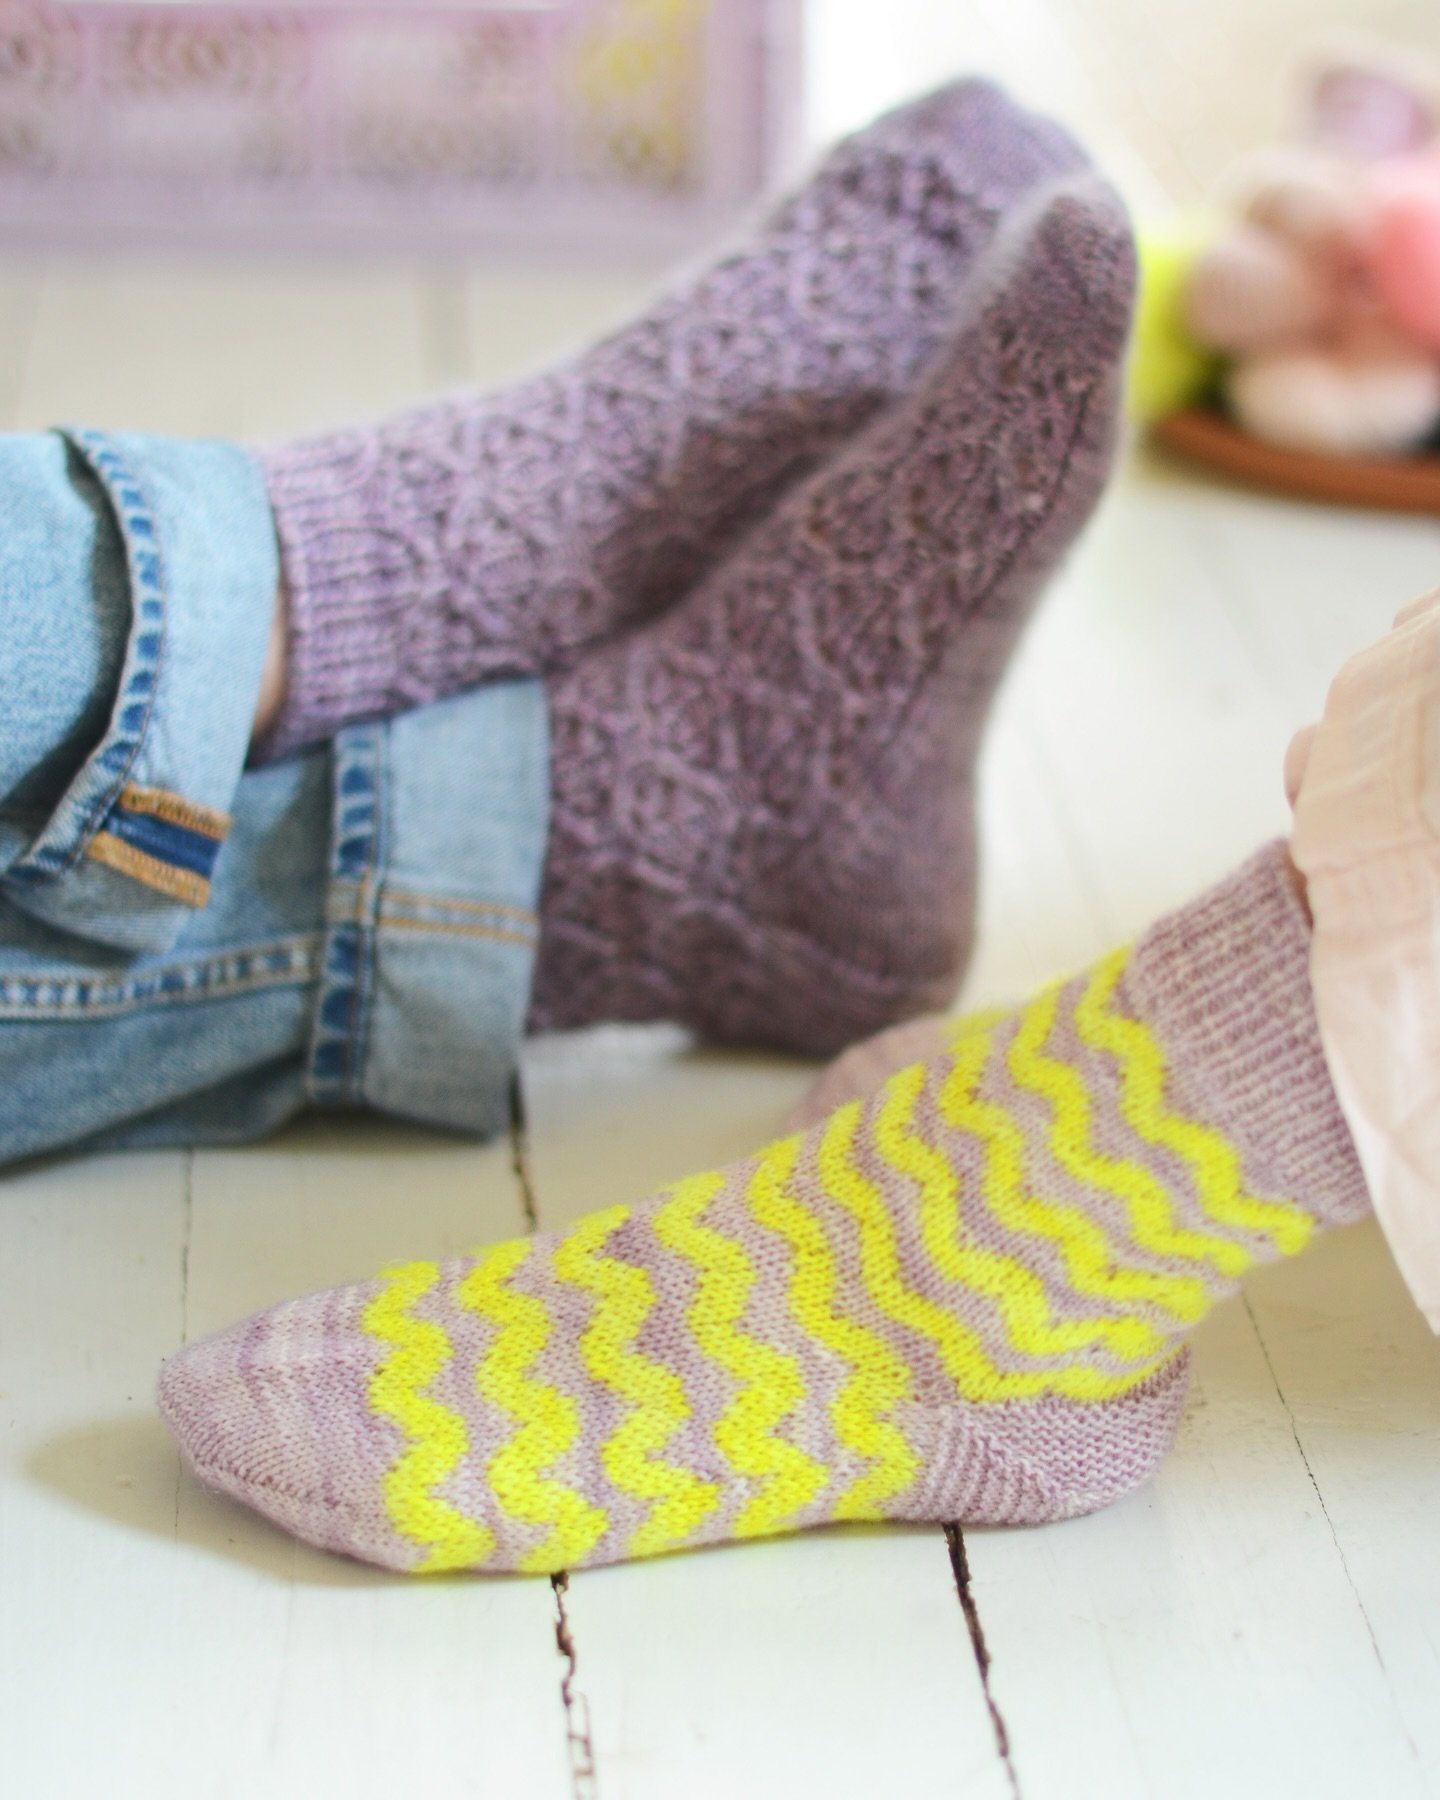 Get your needles ready: patterns for Lemonade and Mauve Socks will be released tomorrow 🥳

These sock are perfect little projects for Spring knitting and the joyful colors make me want to keep going with the lilac and neon yellow combo forever and e